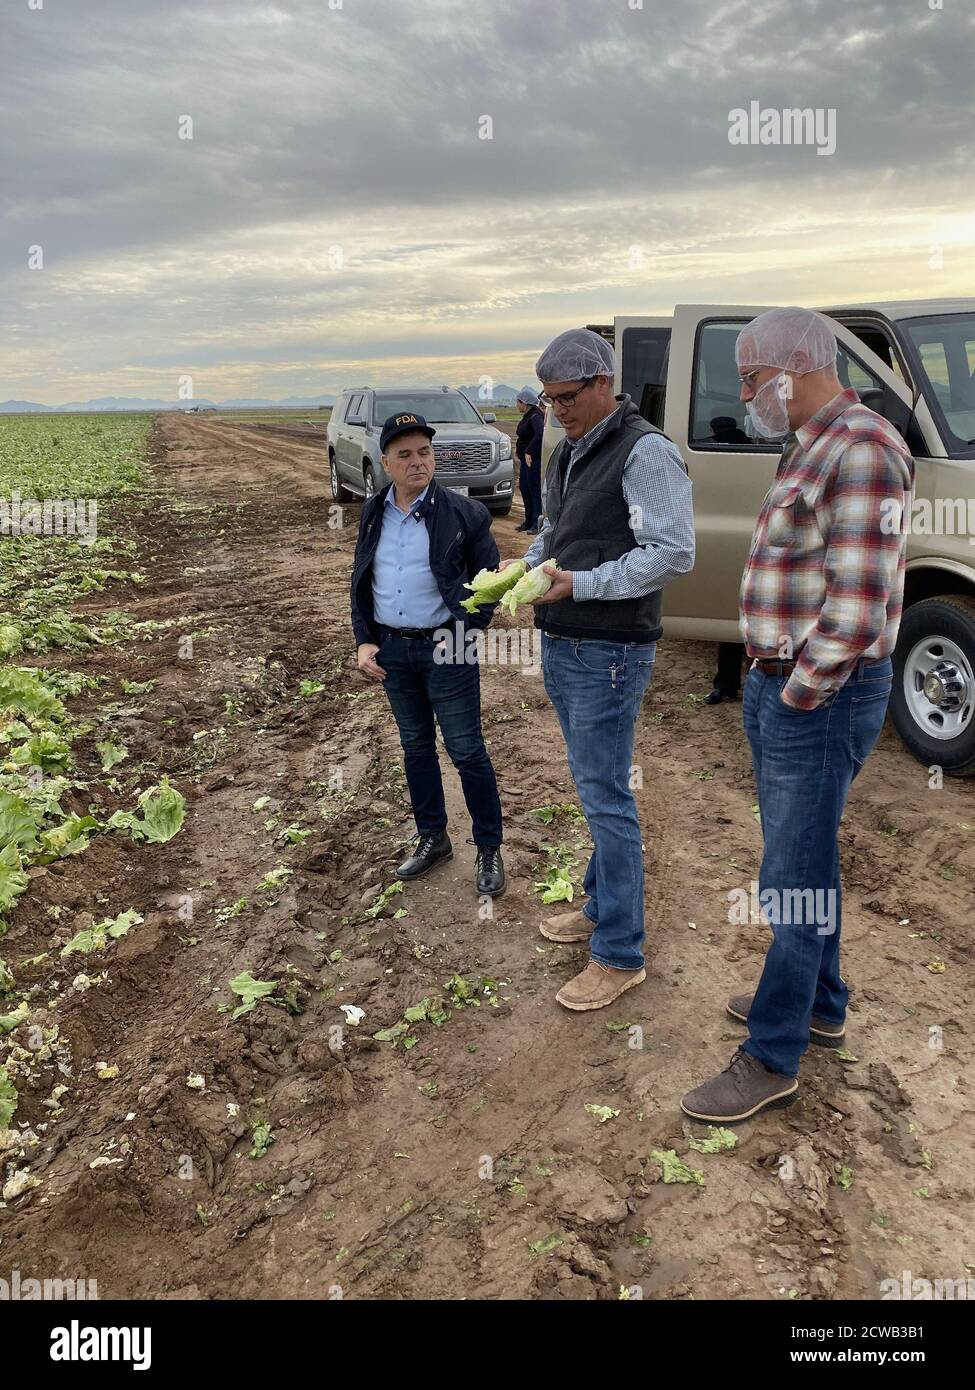 Frank Yiannas in Yuma - 3014 January 9, 2020; Frank Yiannas, FDA's Deputy Commissioner for Food Policy and Response, visited the Yuma growing region in Arizona to see the food safety procedures in place on growing fields and in harvesting operations. Stock Photo